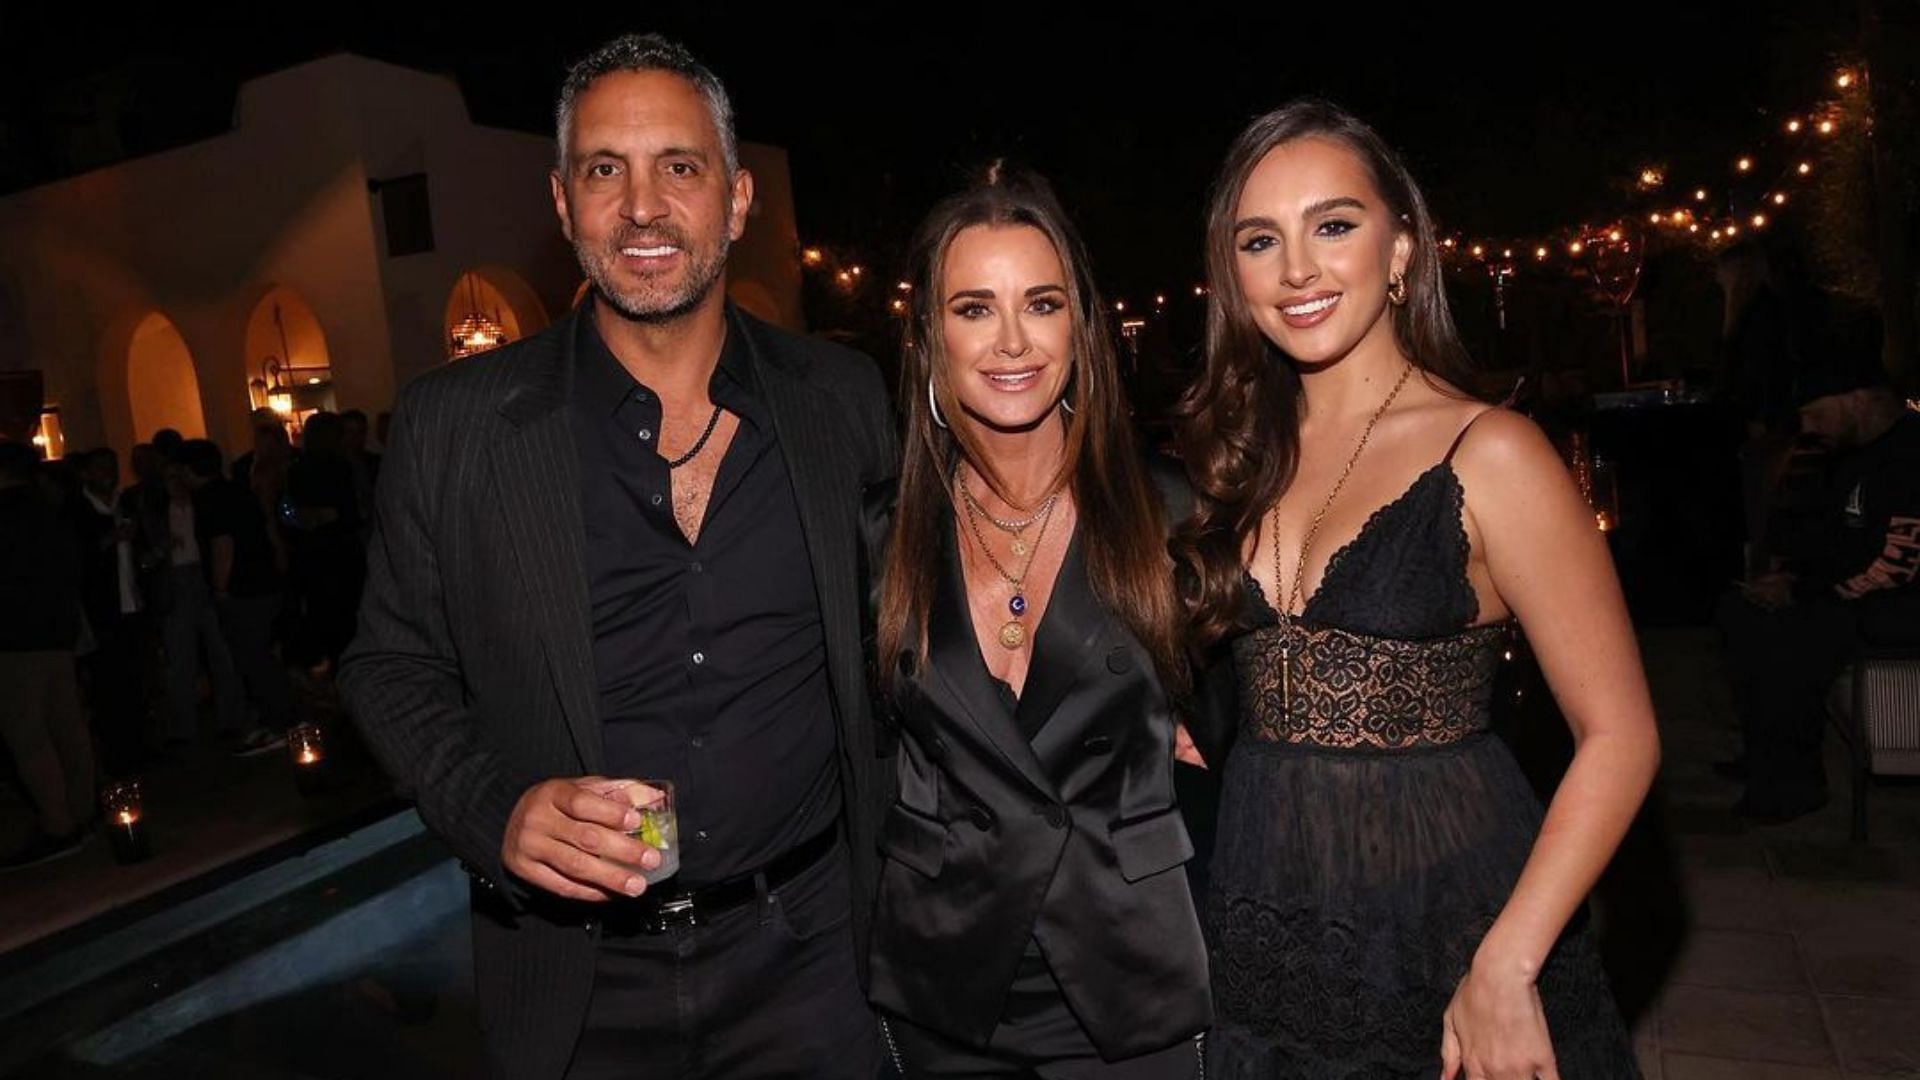 Why do fans think Mauricio Umansky should have given brother-in-law Rick his due credit in Buying Beverly hills?